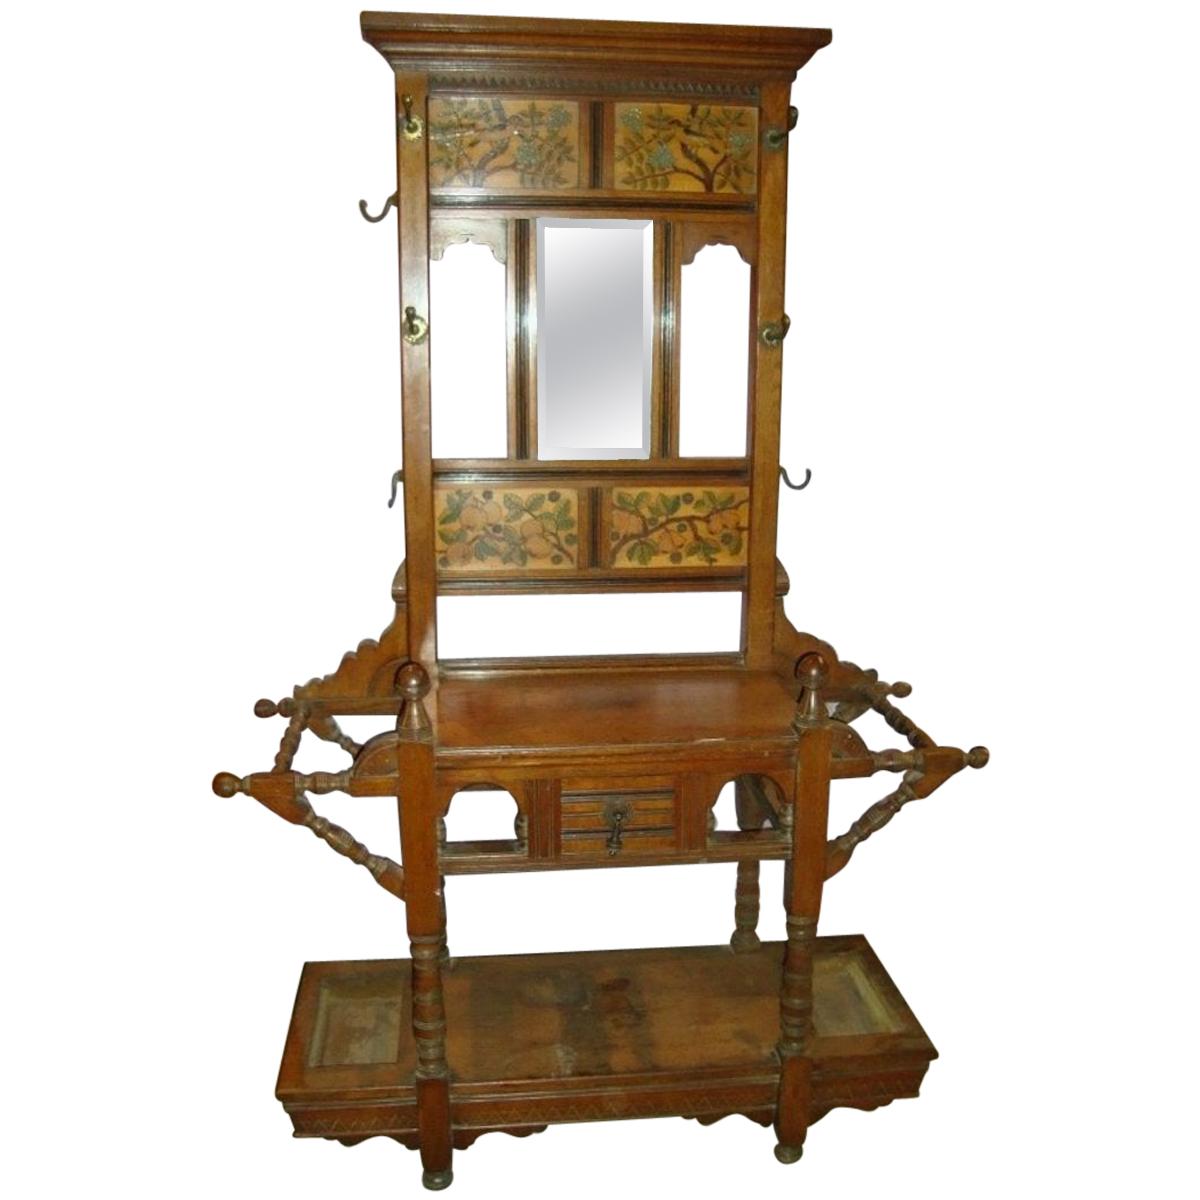 E W Godwin Style of, Anglo-Japanese Oak Hall Stand with Songbirds on Blossoms